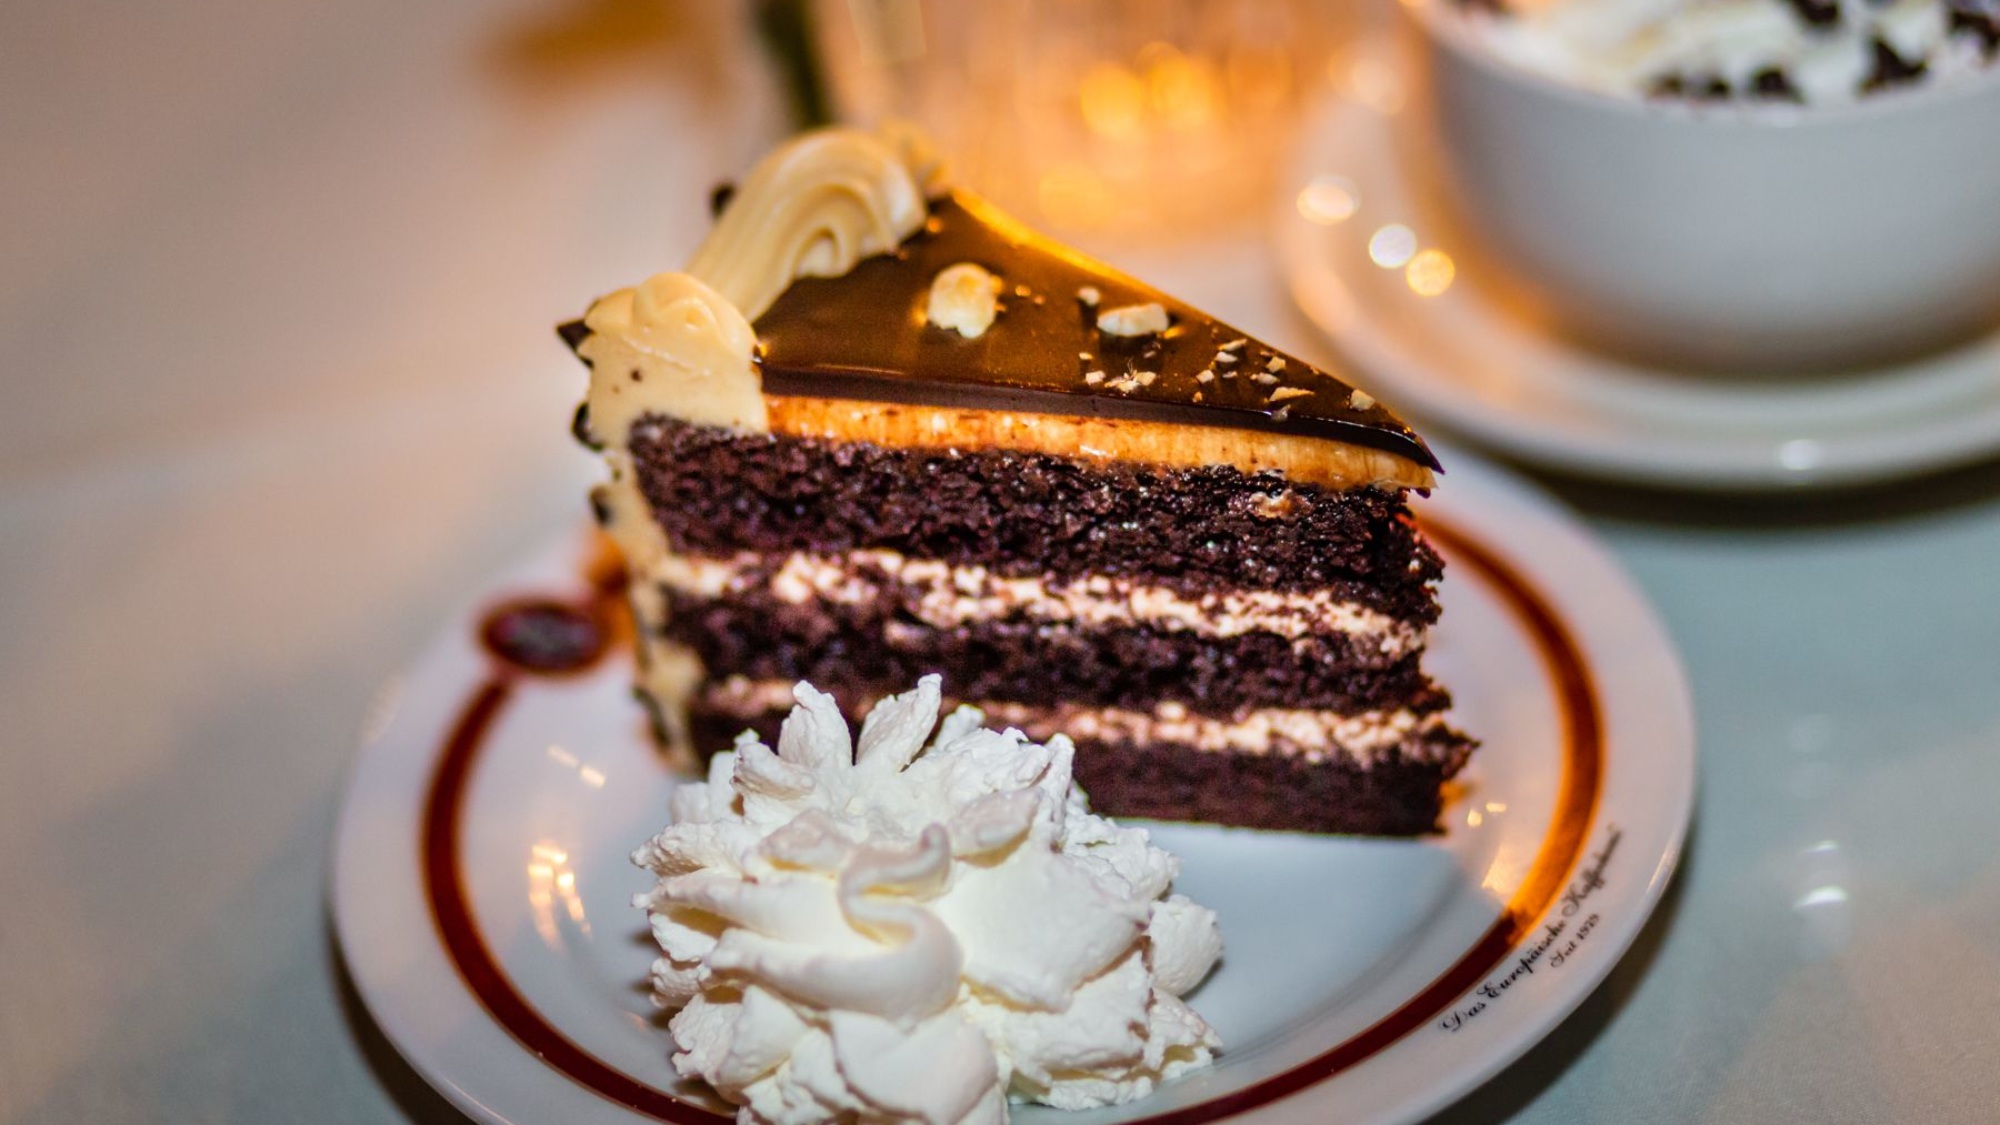 It's always time for dessert at Cafe Intermezzo.